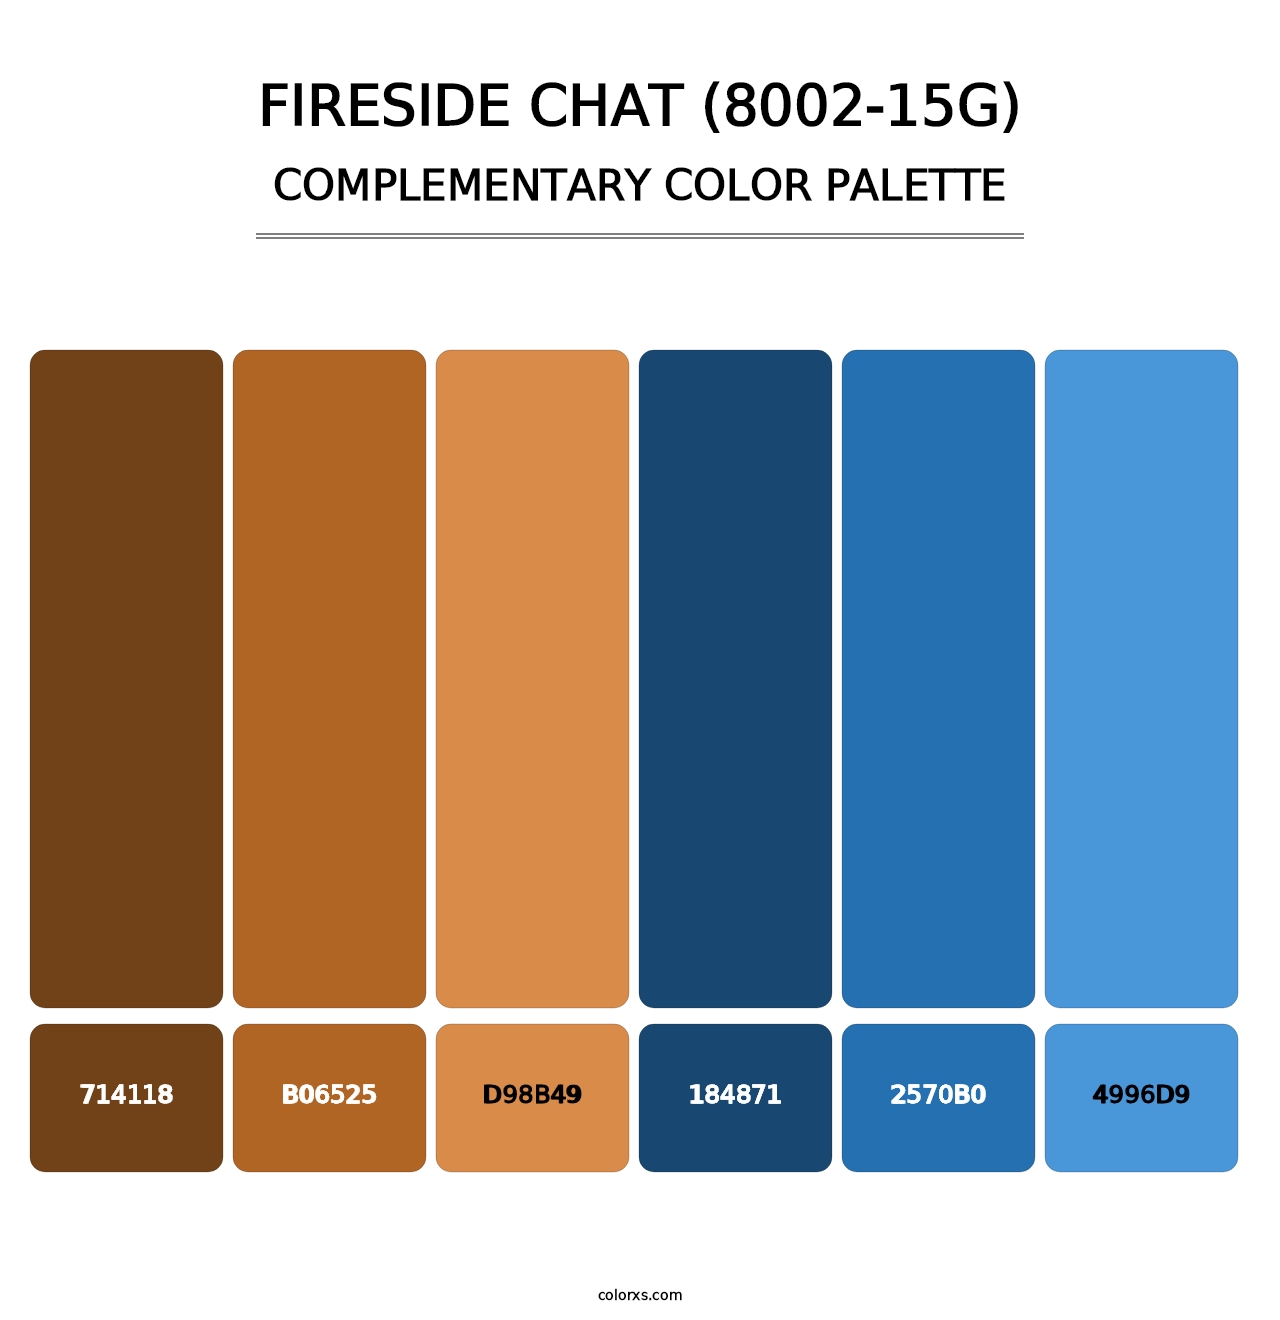 Fireside Chat (8002-15G) - Complementary Color Palette